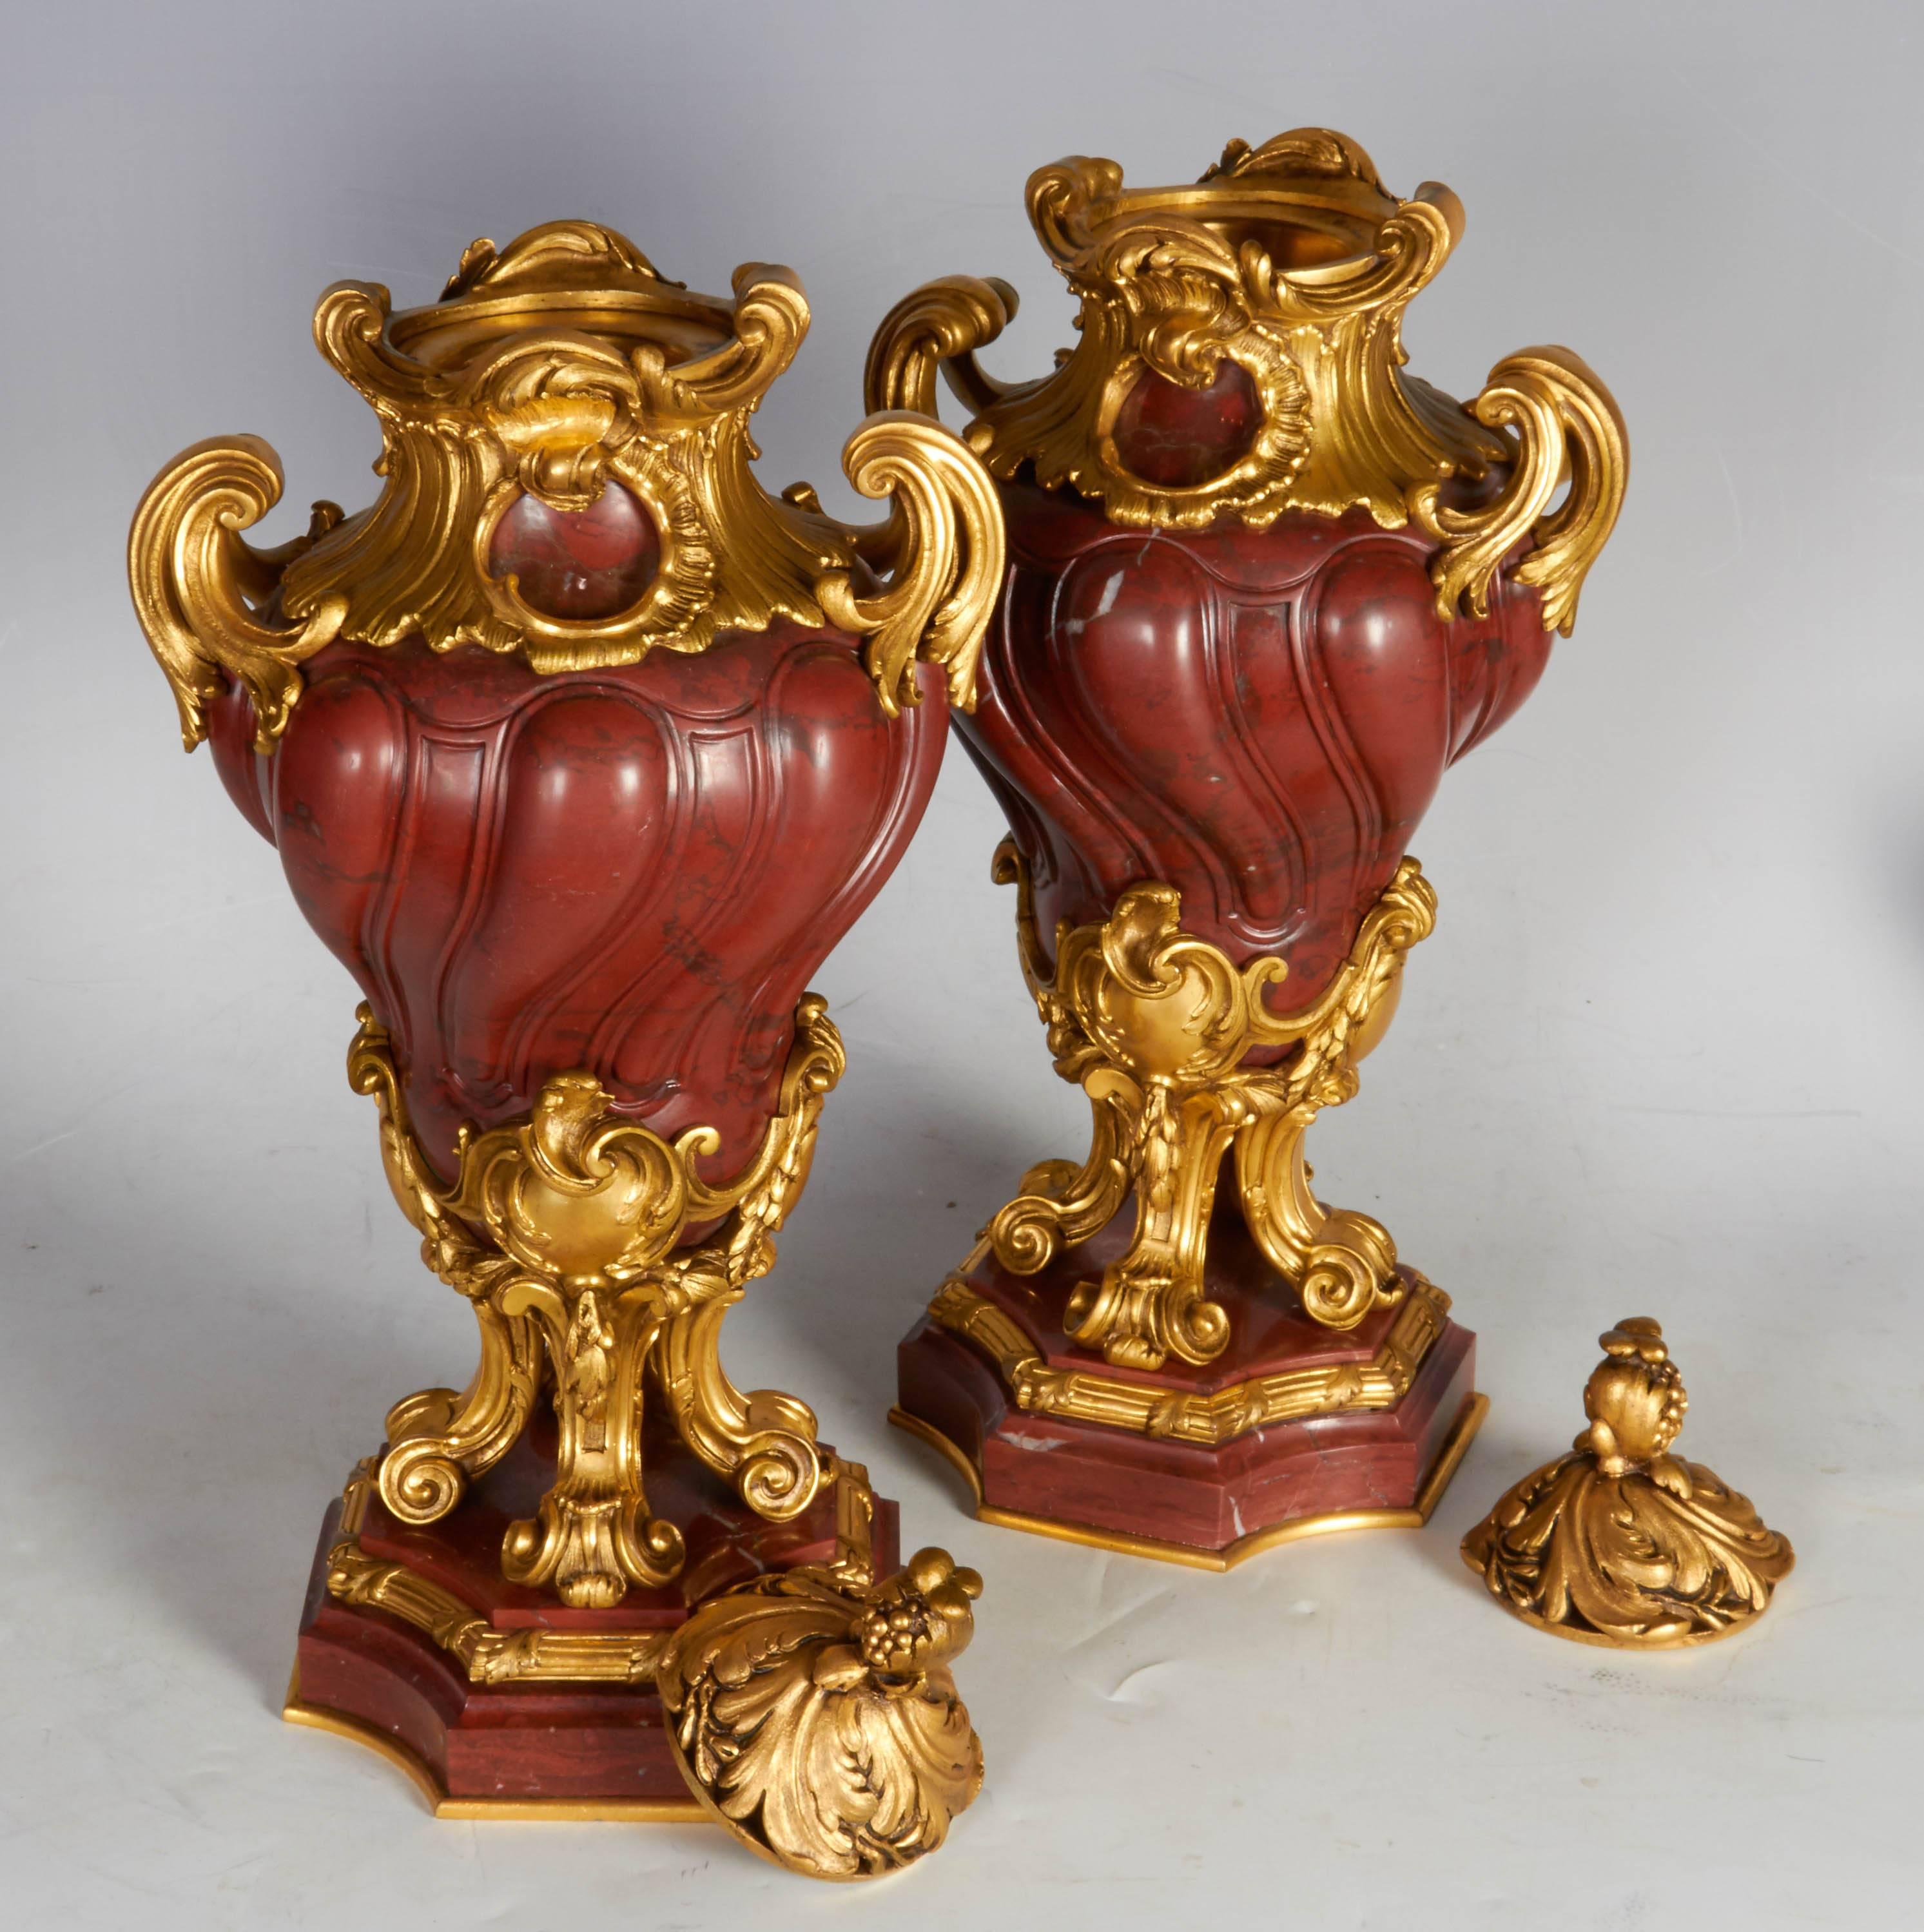 Pair of Antique French Transitional Ormolu-Mounted Rouge Griotte Marble Vases For Sale 1